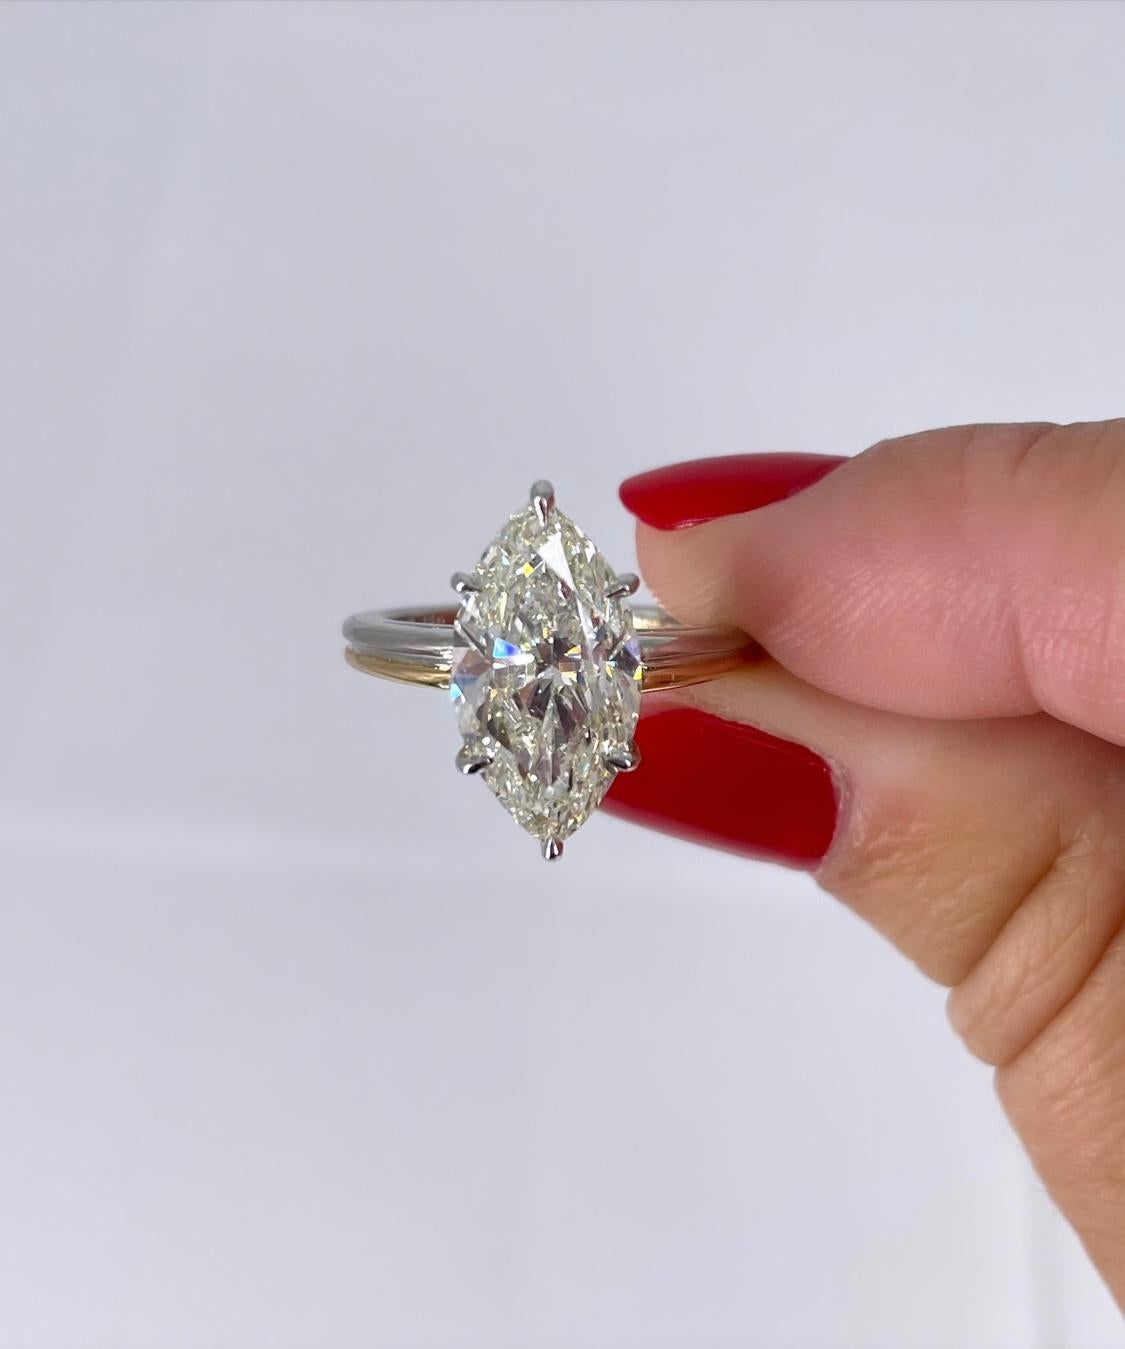 This stunning solitaire features a 3.72 carat marquise diamond, certified by GIA to be L color and SI2 clarity. The unique two-tone setting has a 2.3mm double band in platinum and 18K yellow gold. The platinum basket cradling the diamond is airy and